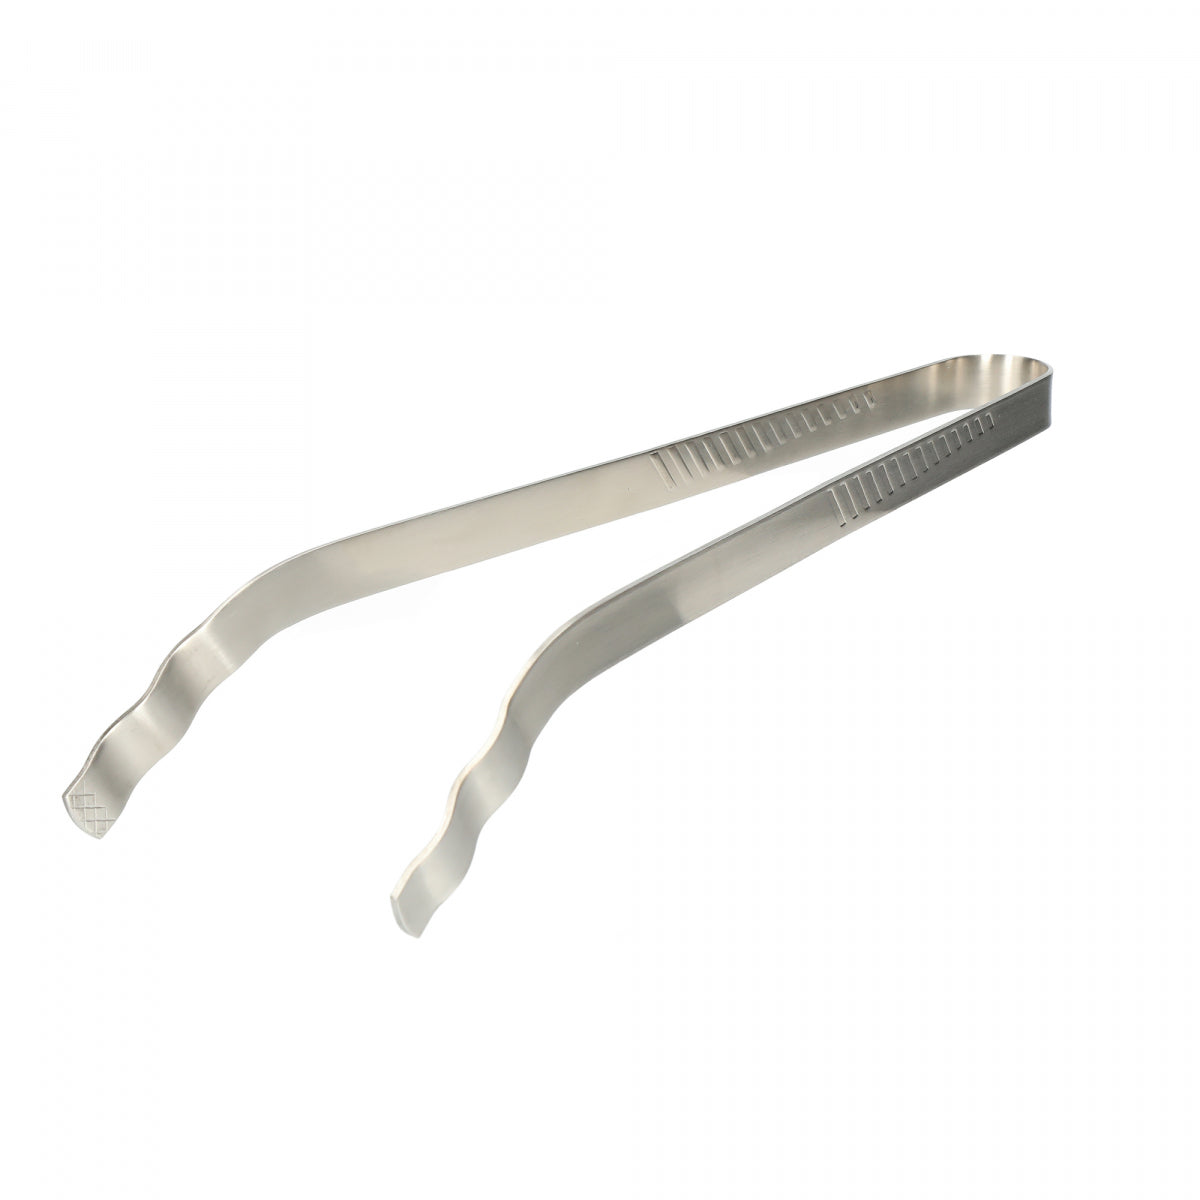 XXL Stainless Steel Long Tongs 35cm